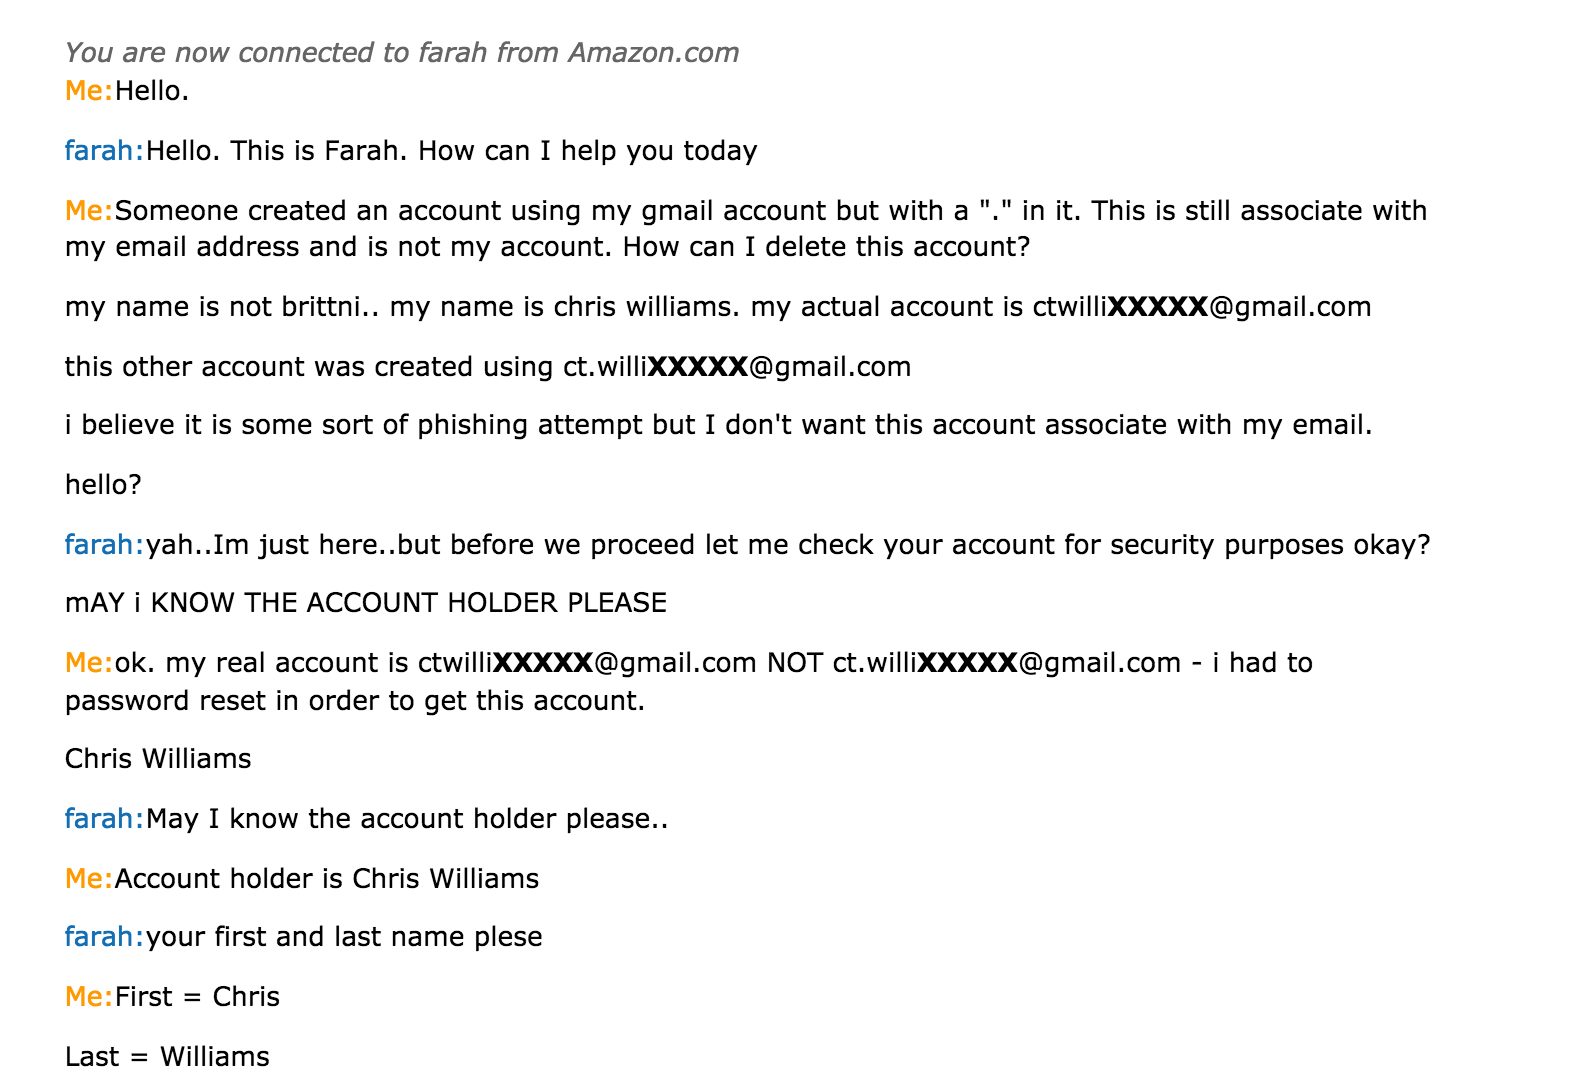 live-chat-customer-service-fail-from-amazon